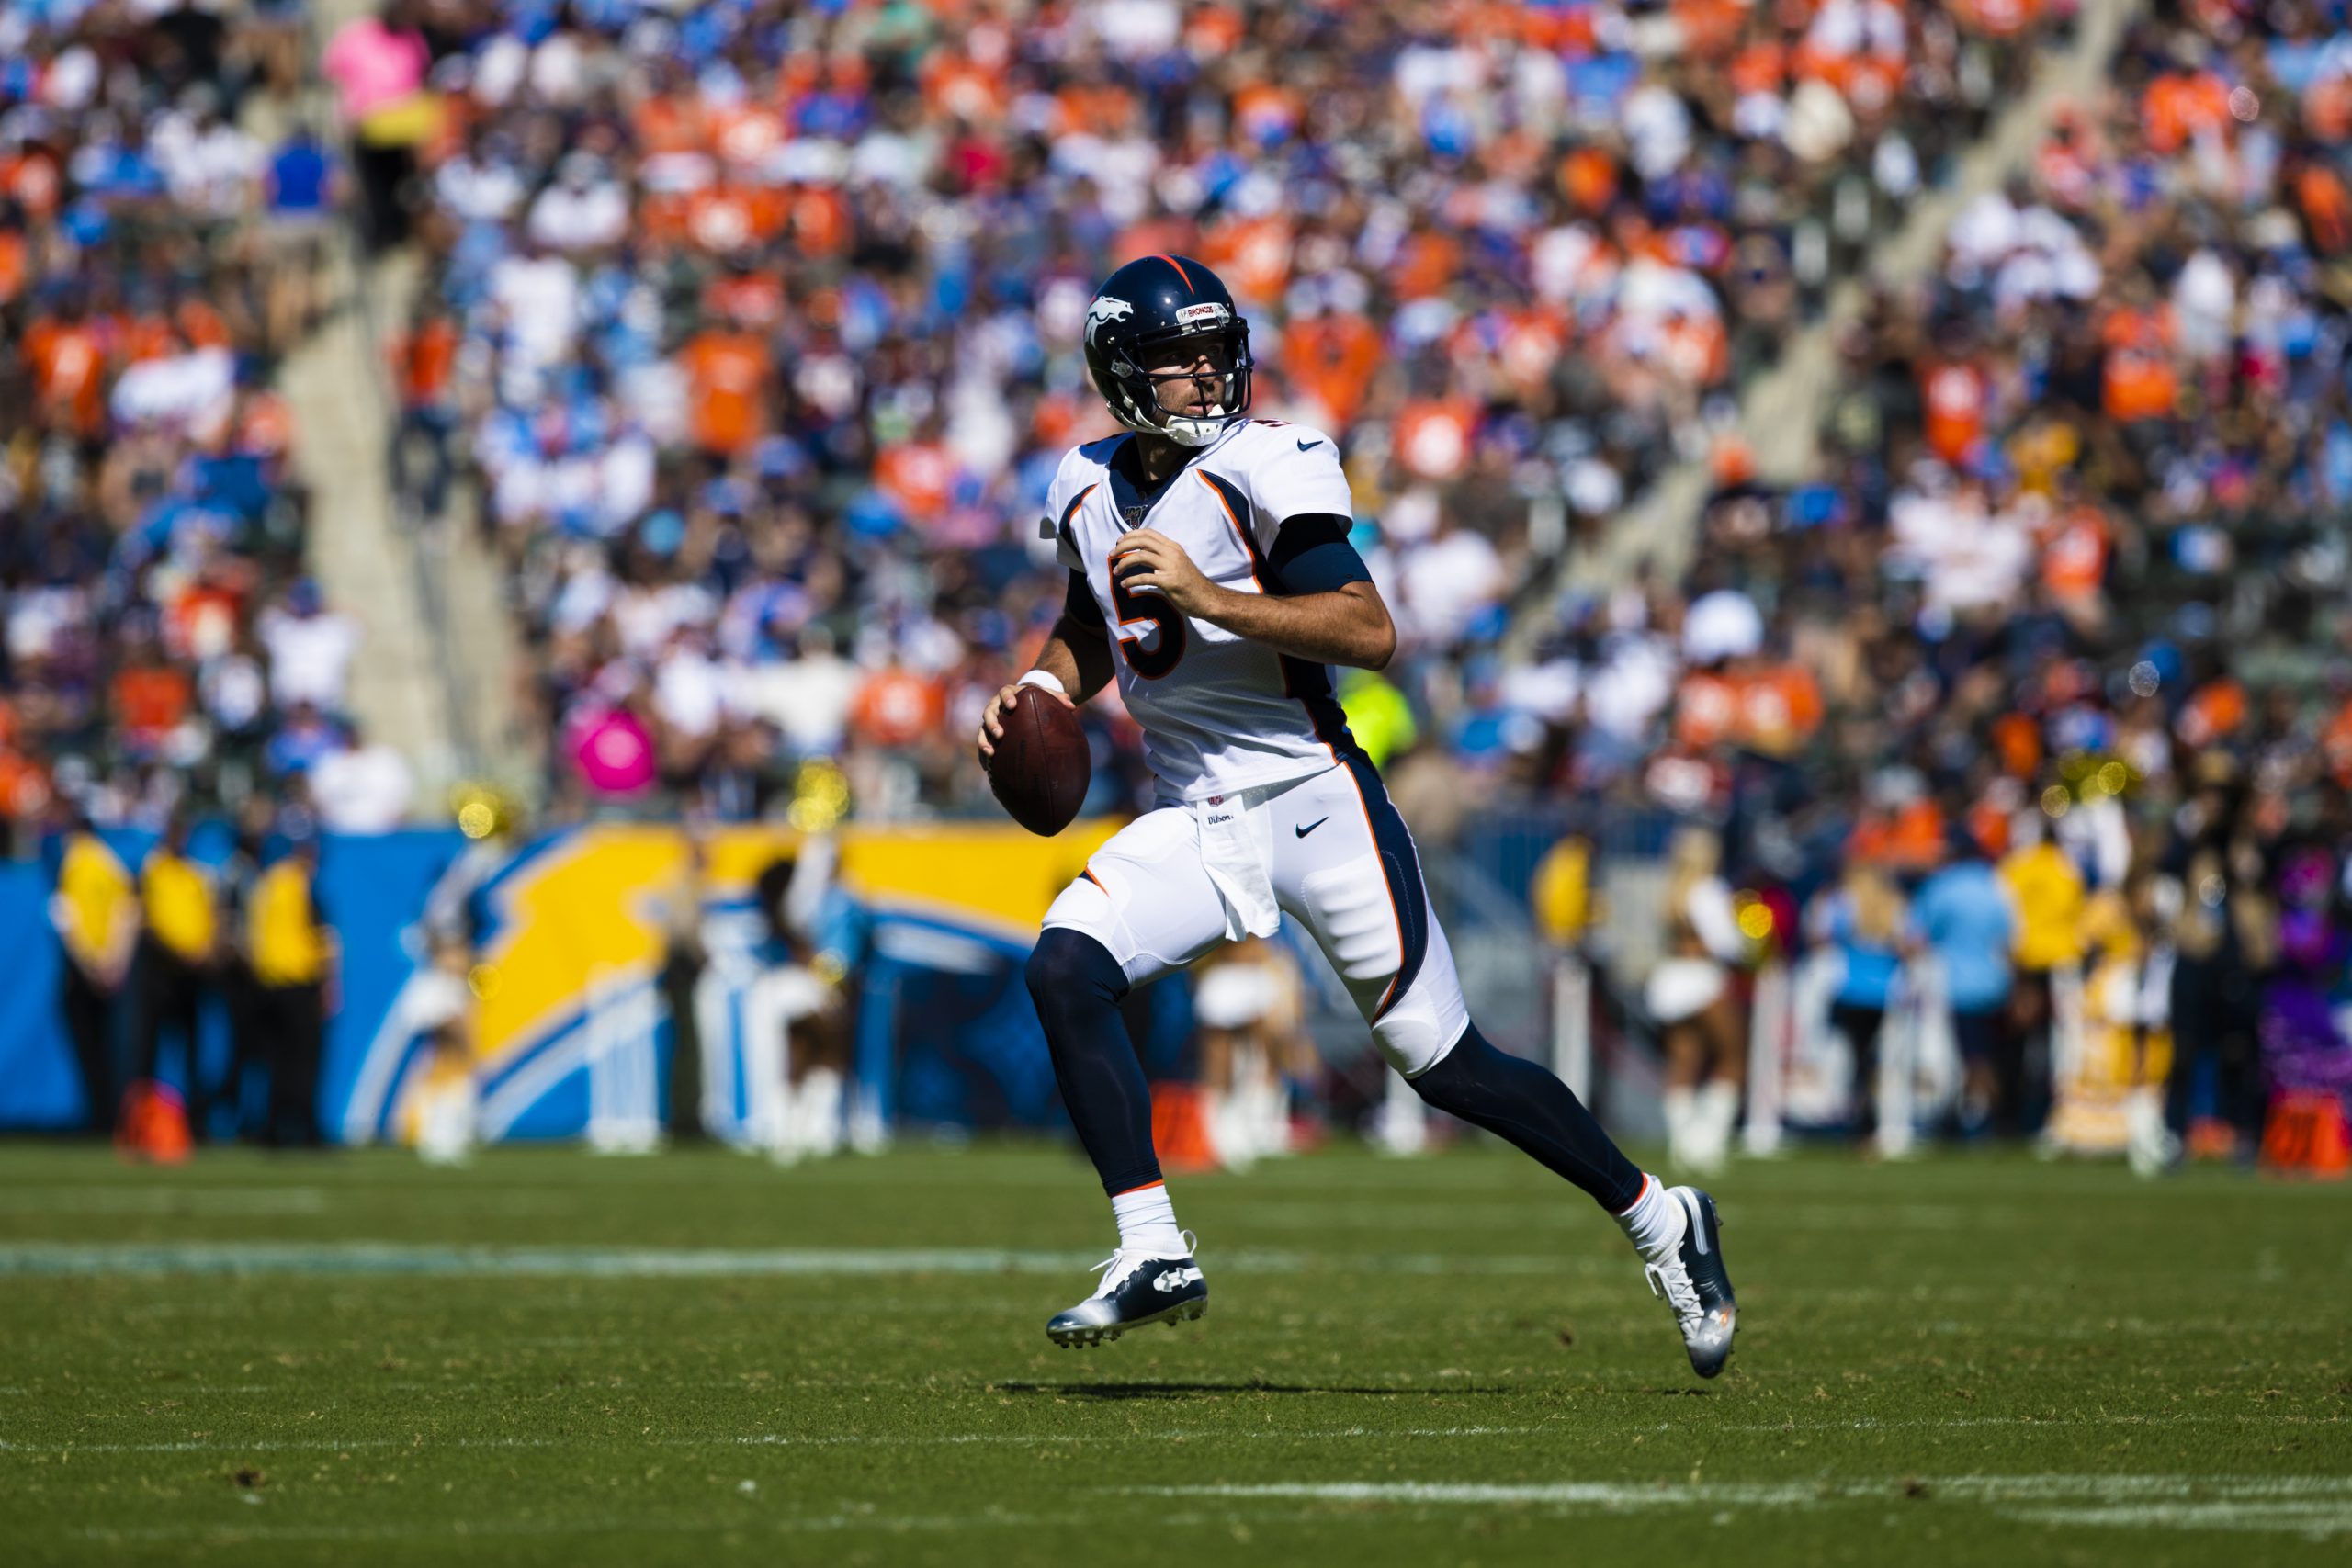 LOS ANGELES, CA - OCTOBER 06: Denver Broncos quarterback Joe Flacco (5) rolls out to pass during the NFL, American Footb